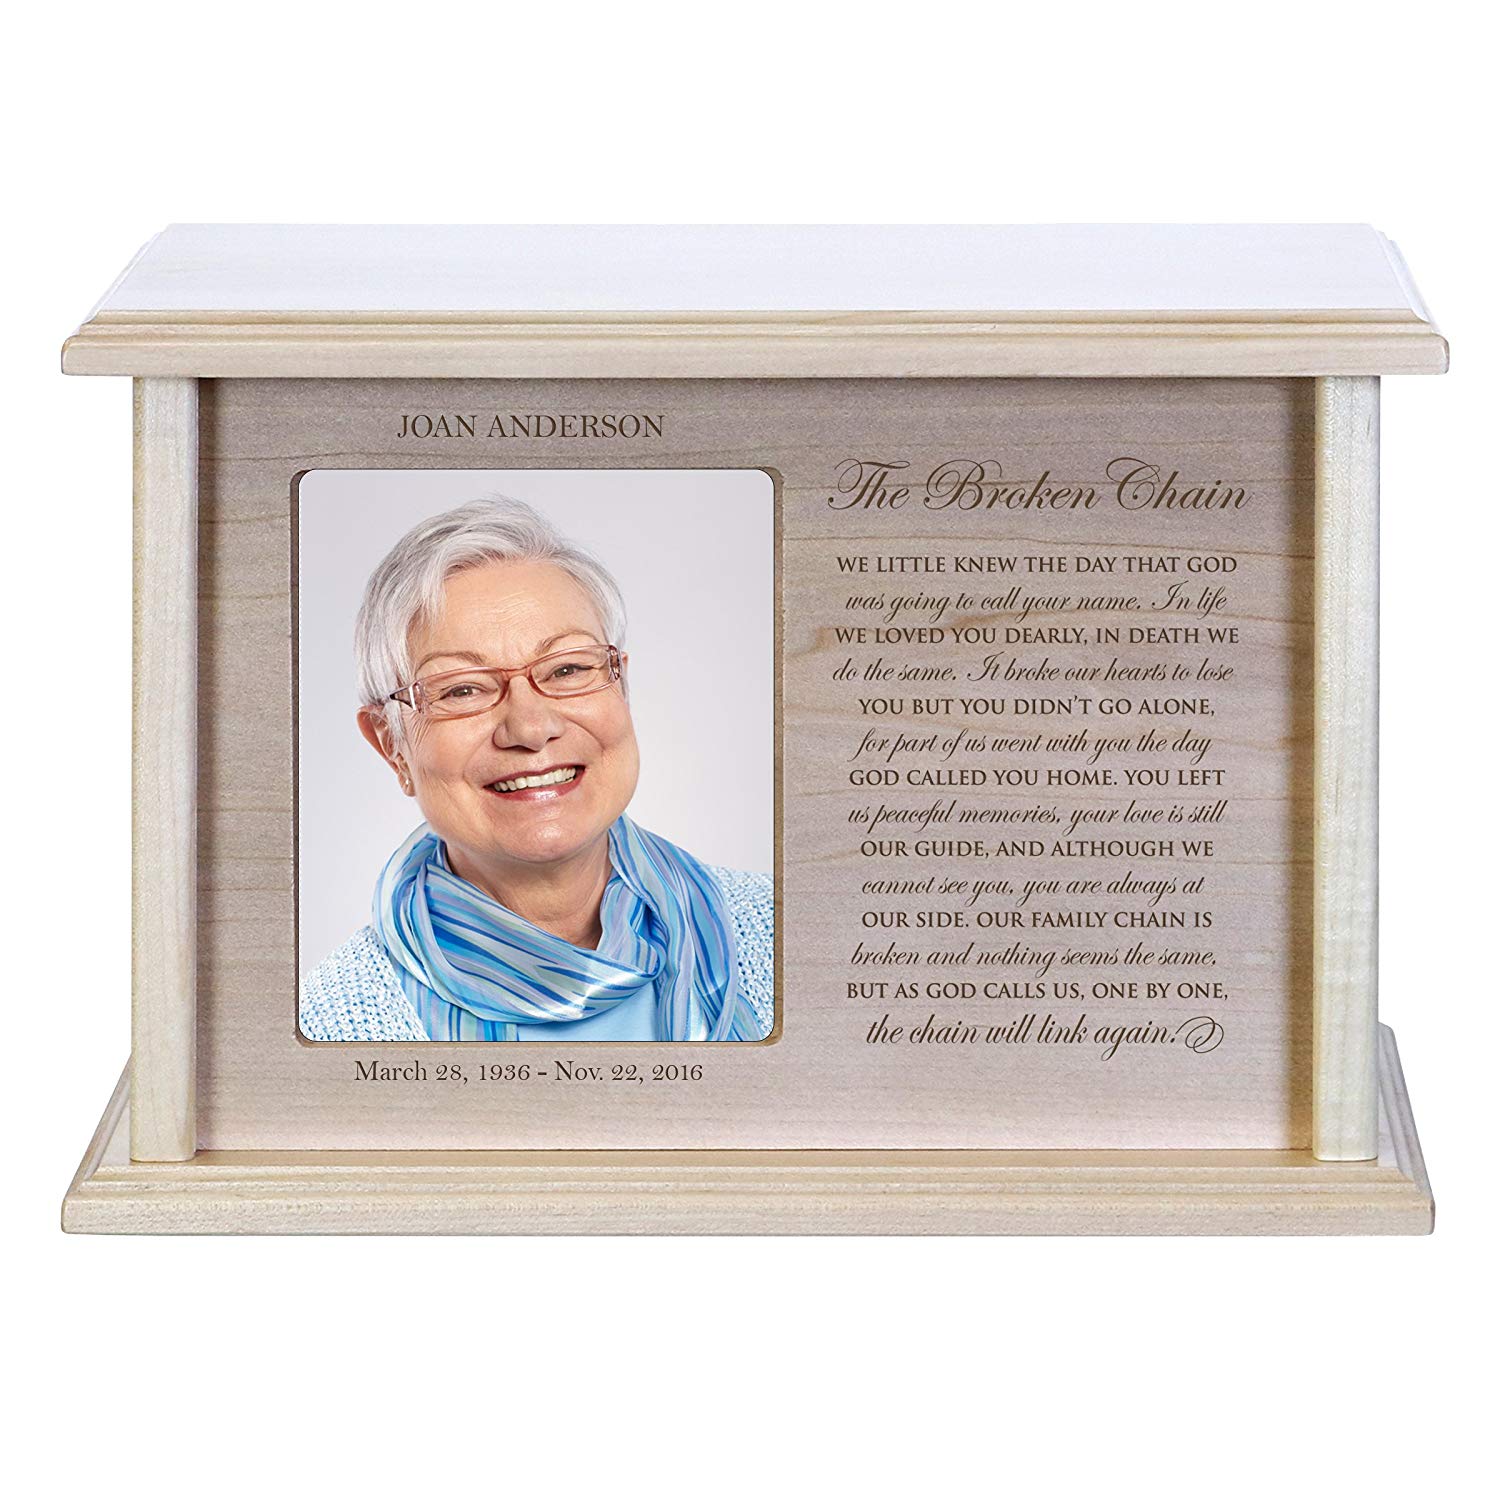 Custom Engraved Solid Wood Cremation Urn Box with 4x6 Photo holds 200 cu in of Human Ashes The Broken Chain - LifeSong Milestones